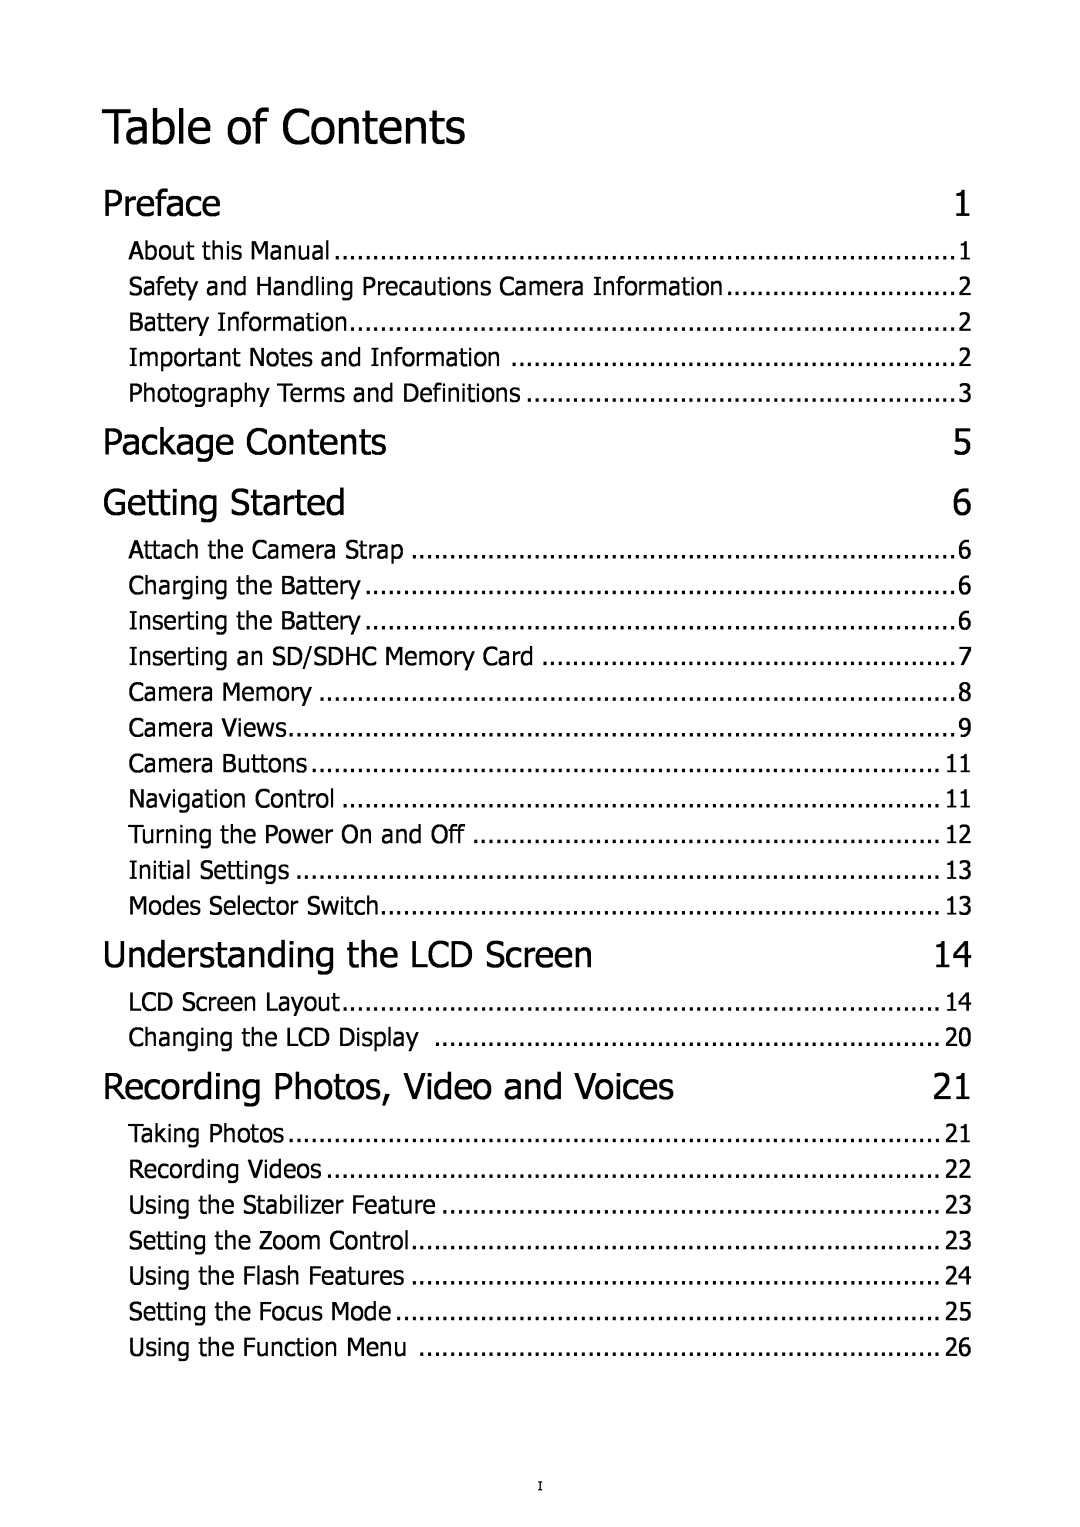 HP SW450 manual Table of Contents, Preface, Package Contents, Getting Started, Understanding the LCD Screen 